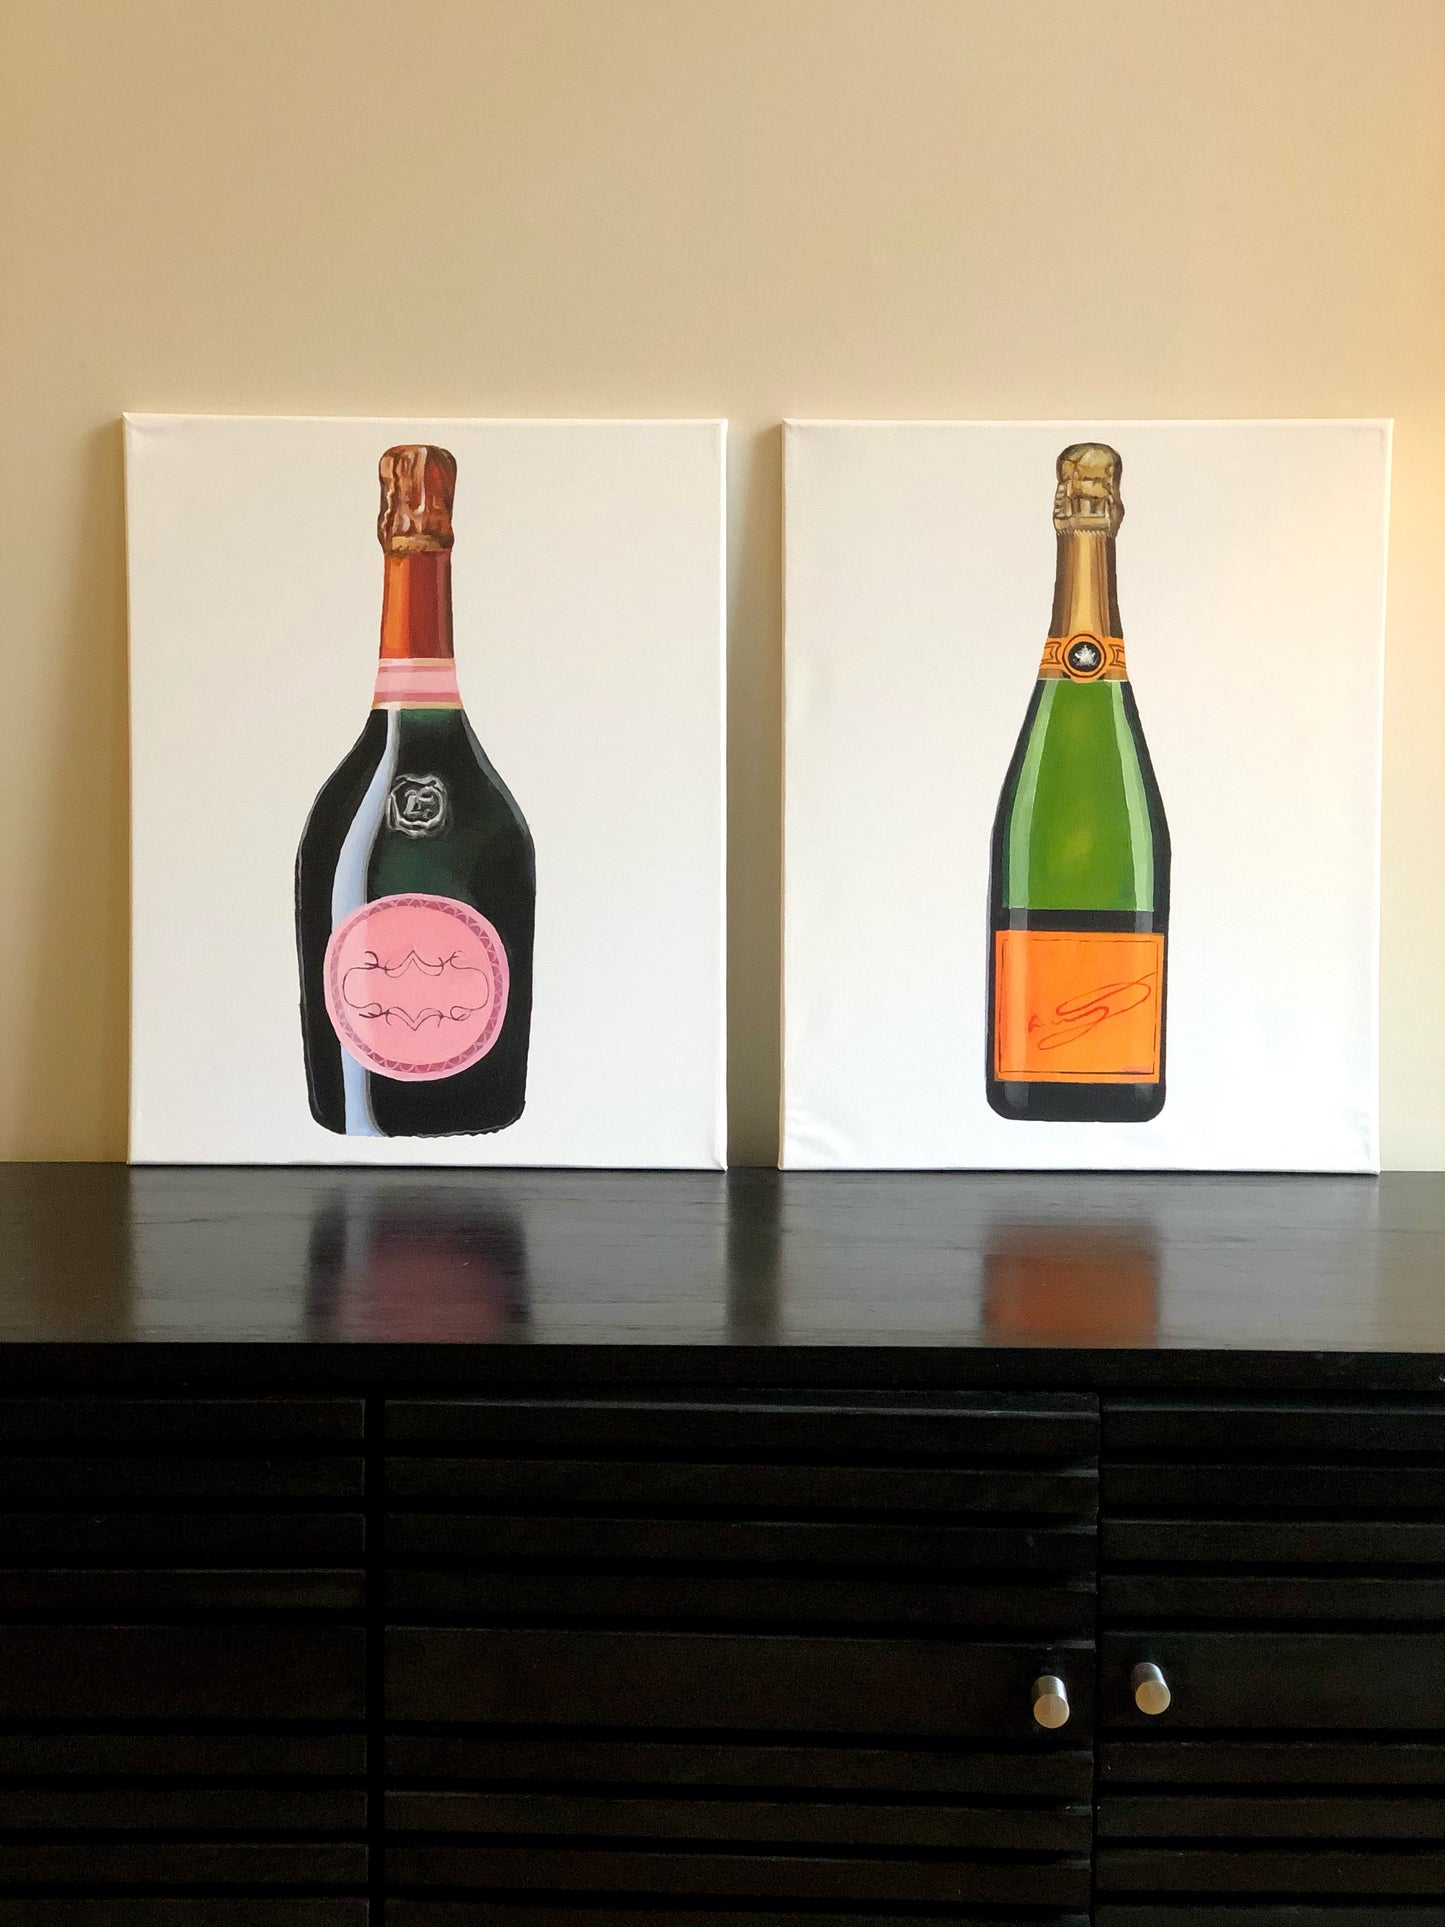 Veuve Clicquot Champagne Painting